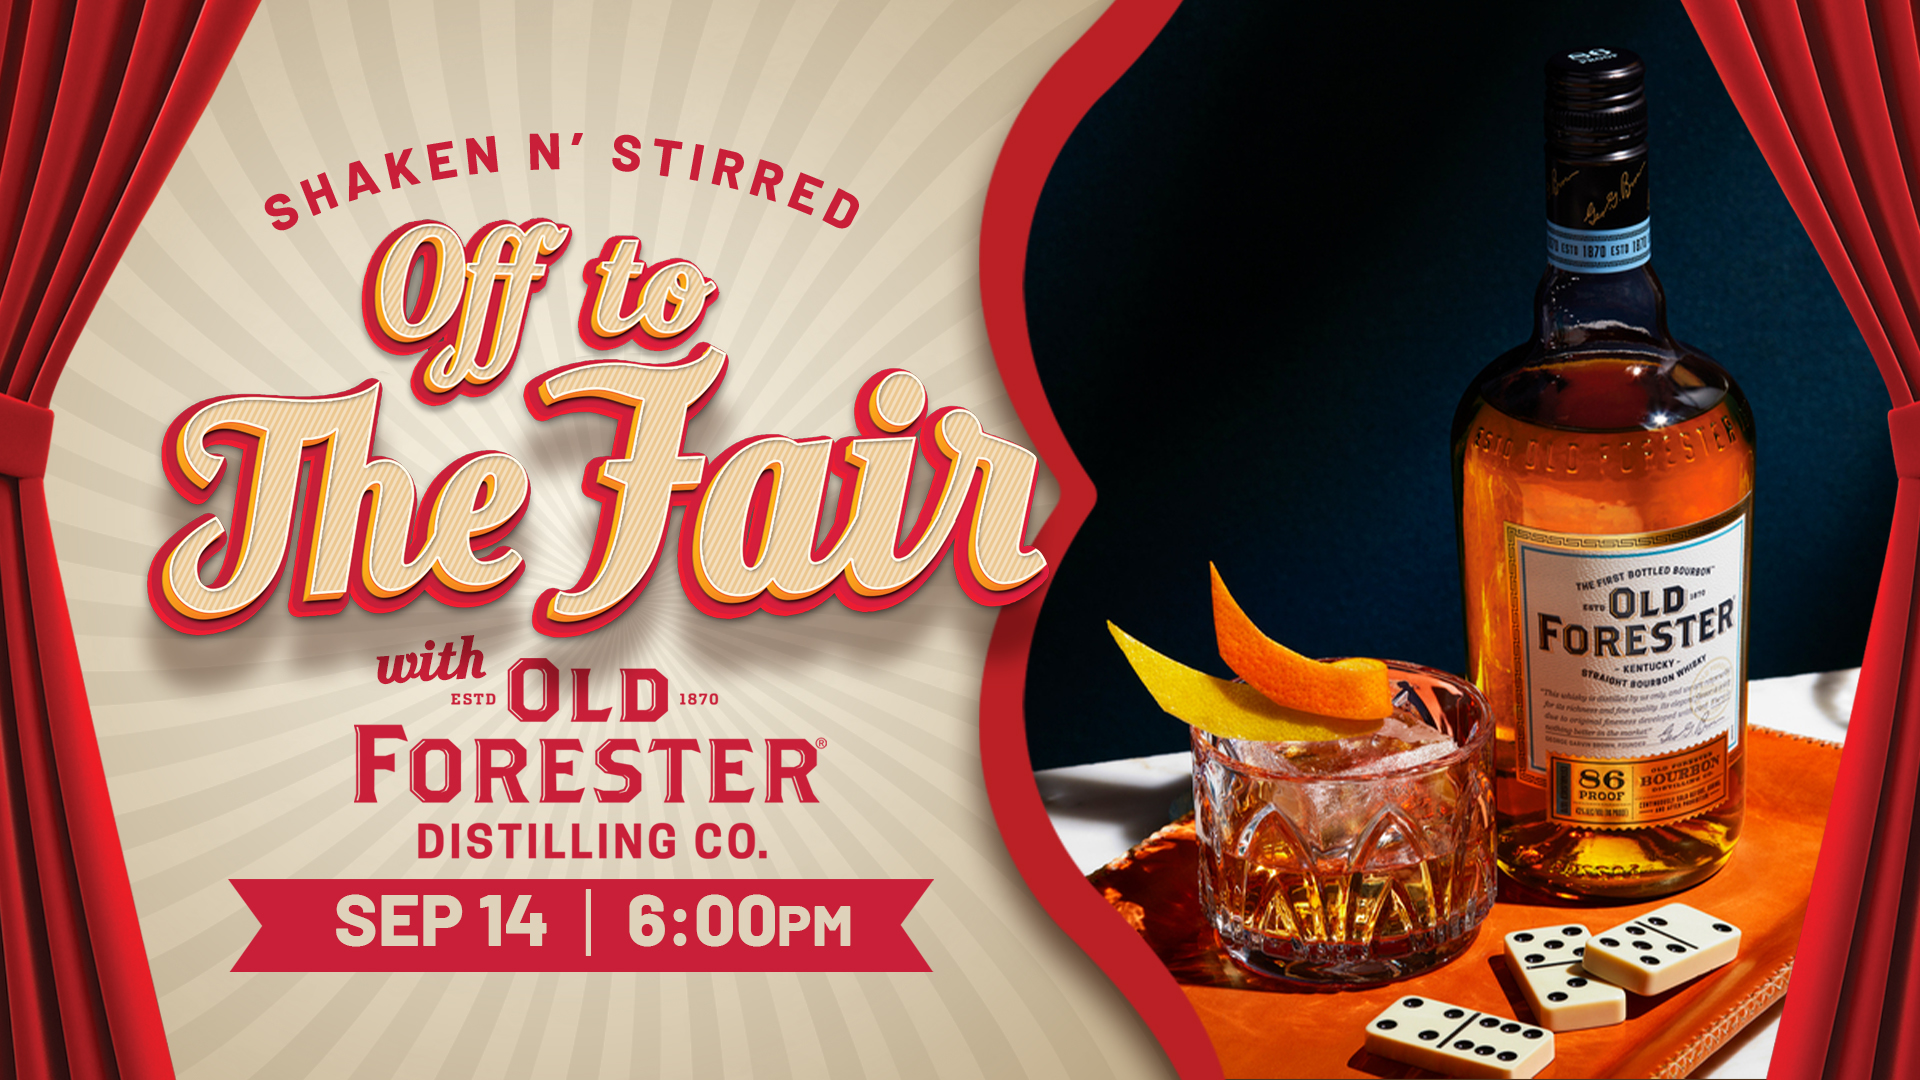 Shaken N’ Stirred: Off to the Fair with Old Forester - hero